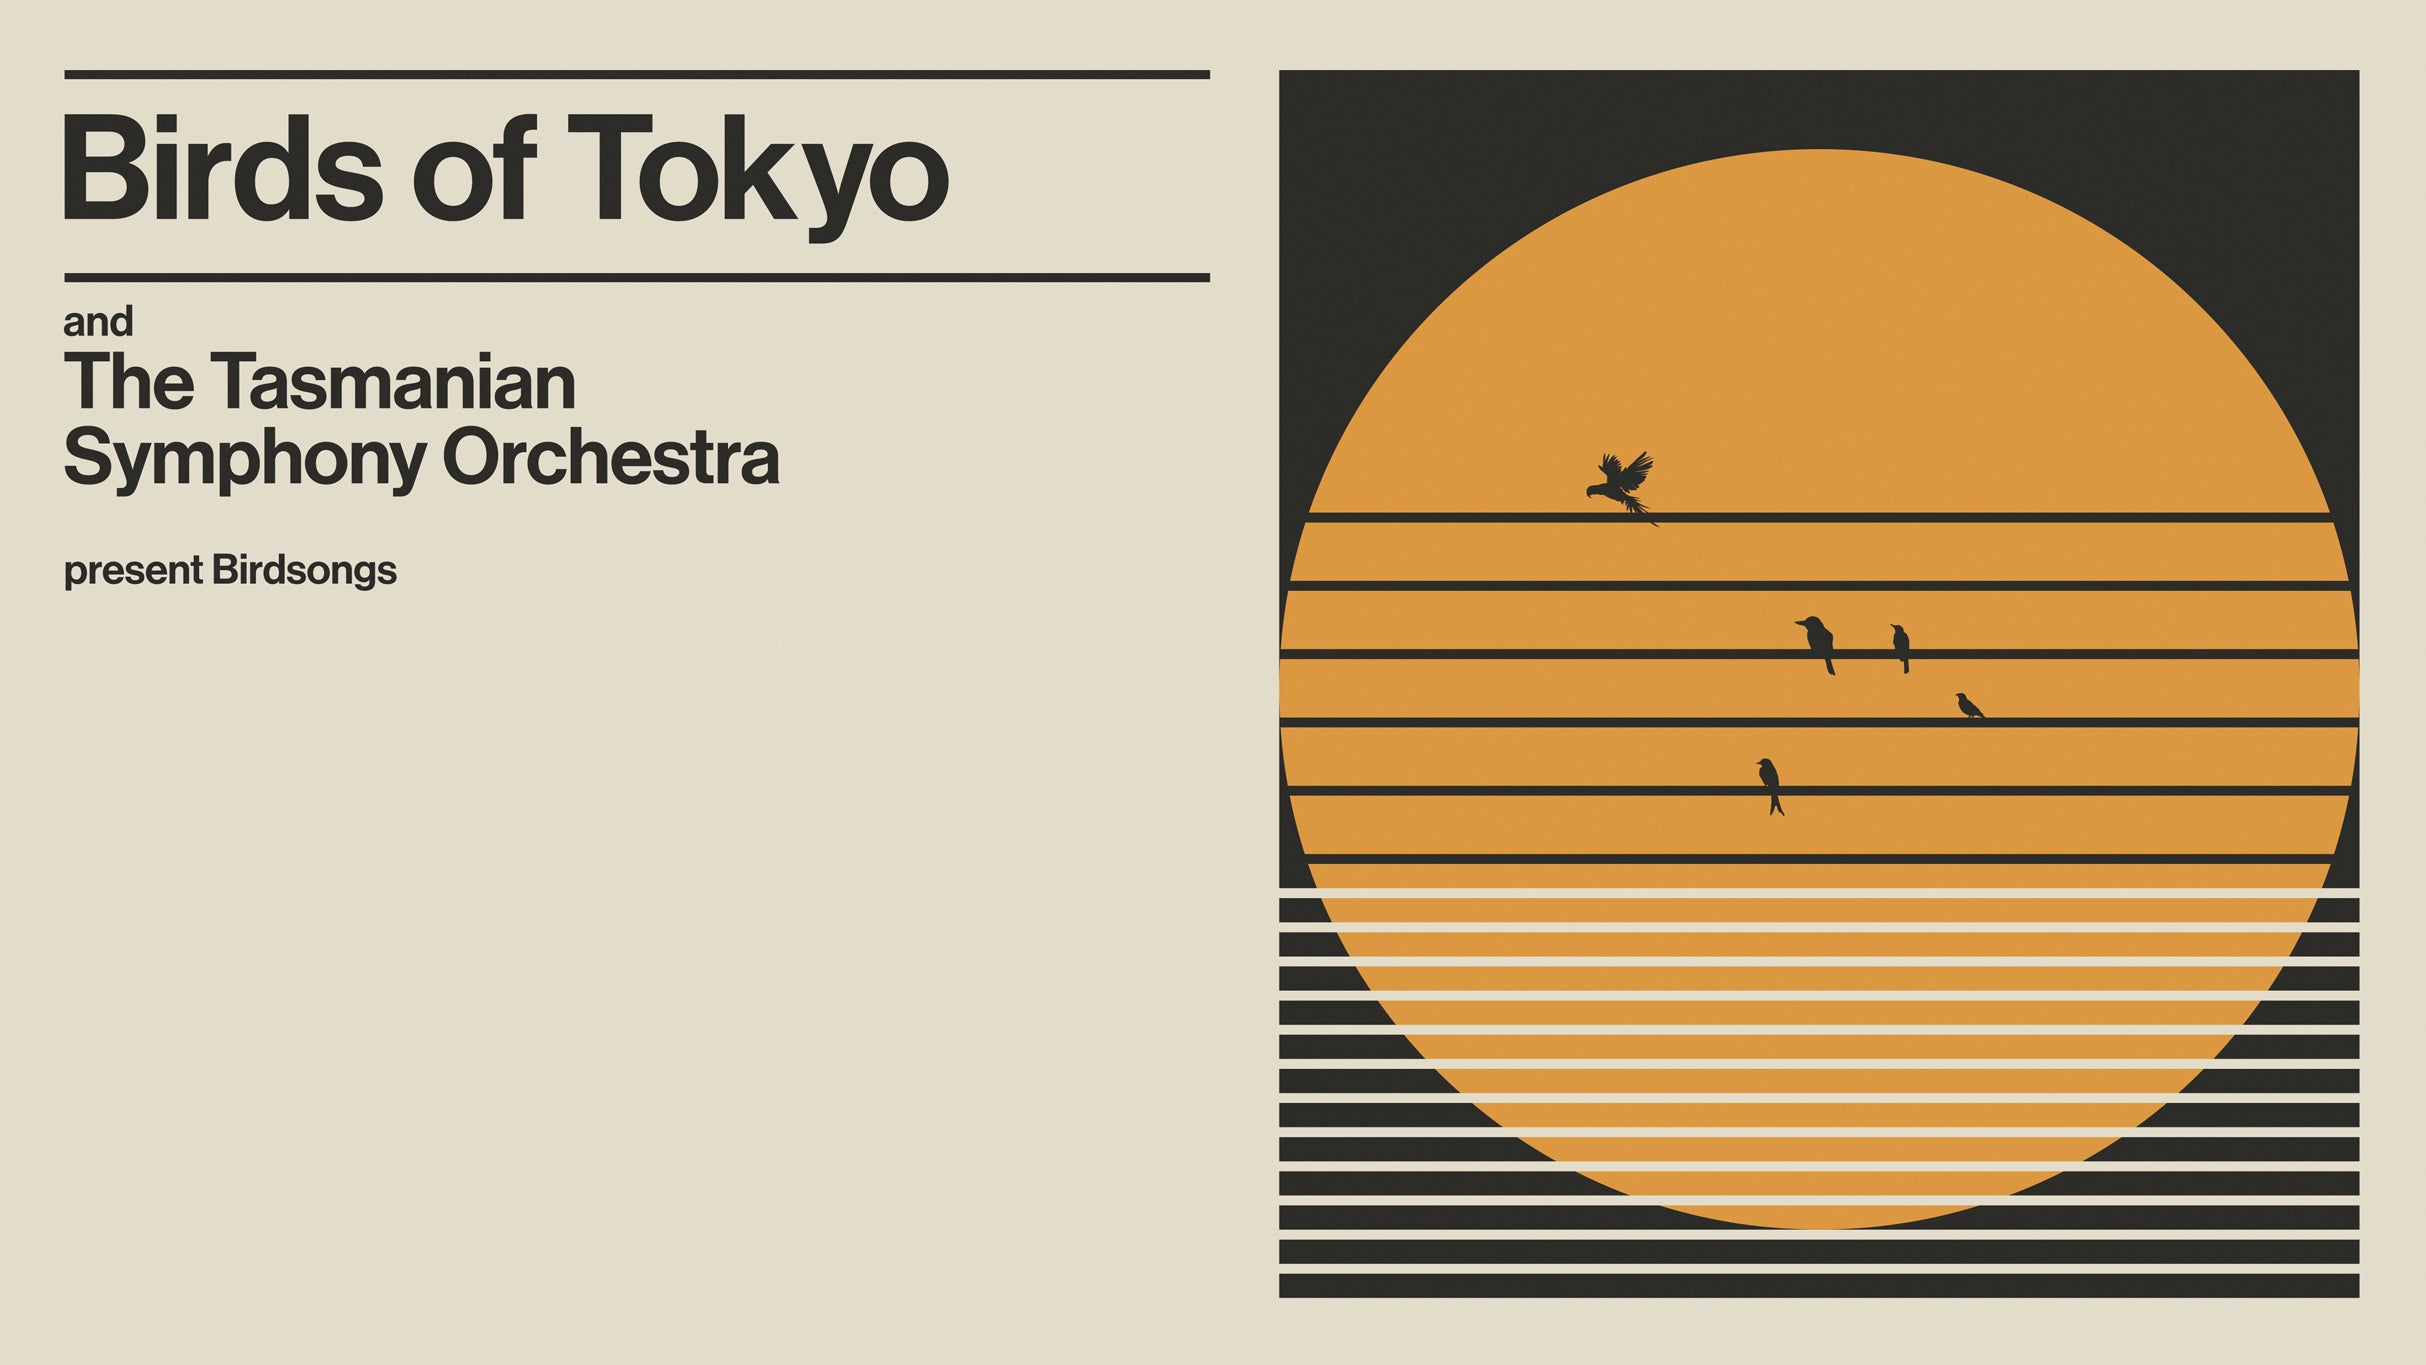 Image used with permission from Ticketmaster | Birdsongs: featuring Birds of Tokyo & Tasmanian Symphony Orchestra tickets